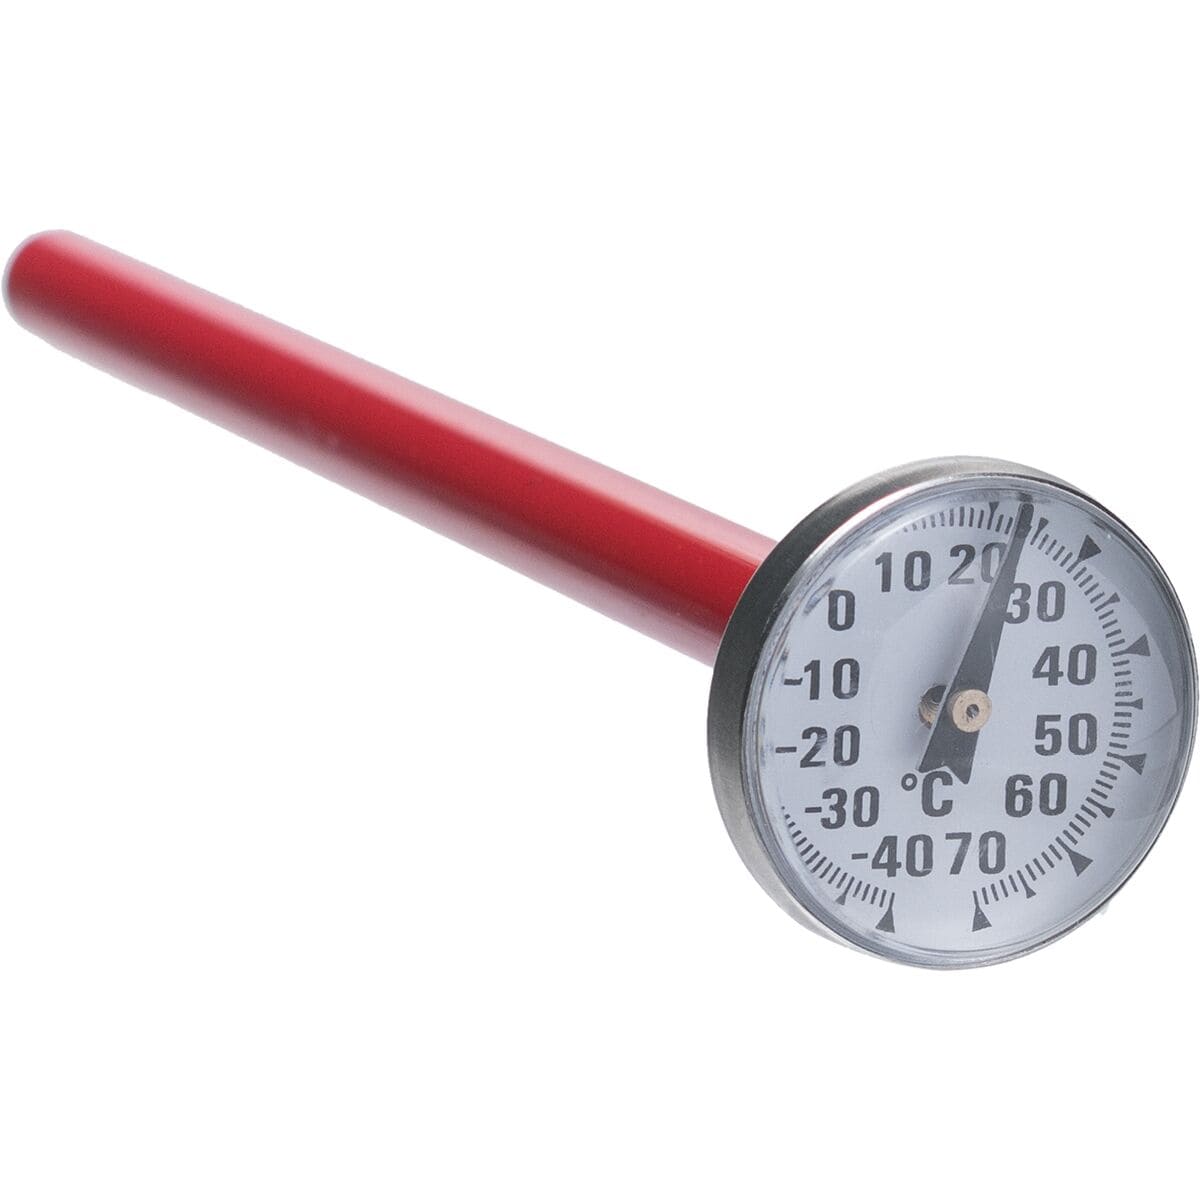 Backcountry Access Analog Thermometer One Color, One Size